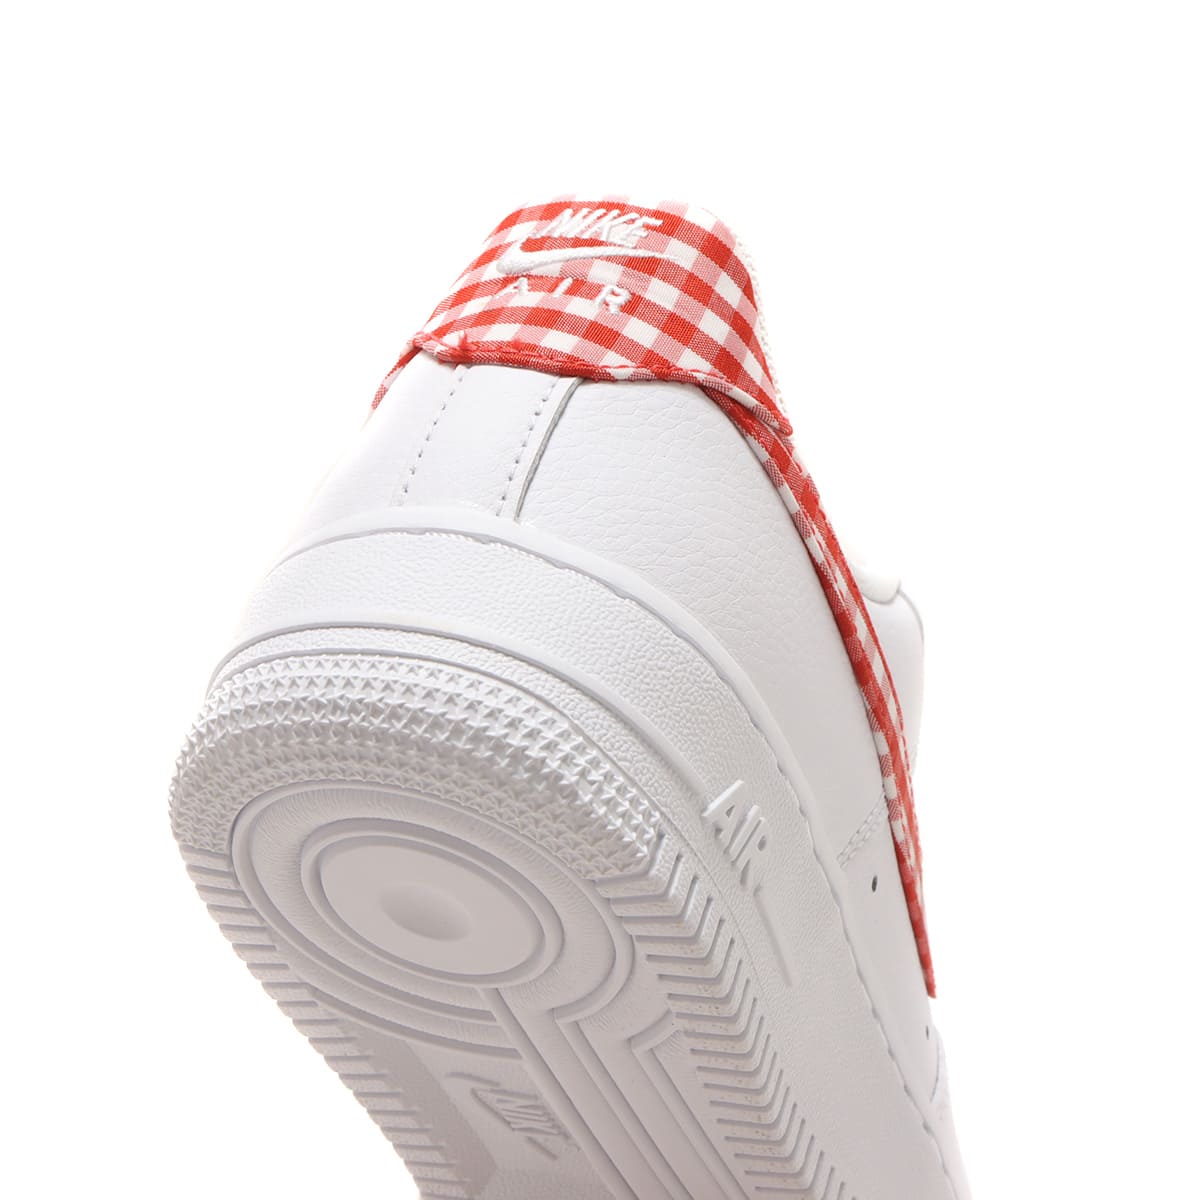 NIKE WMNS AIR FORCE 1 '07 ESS TREND WHITE/MYSTIC RED 23FA-I